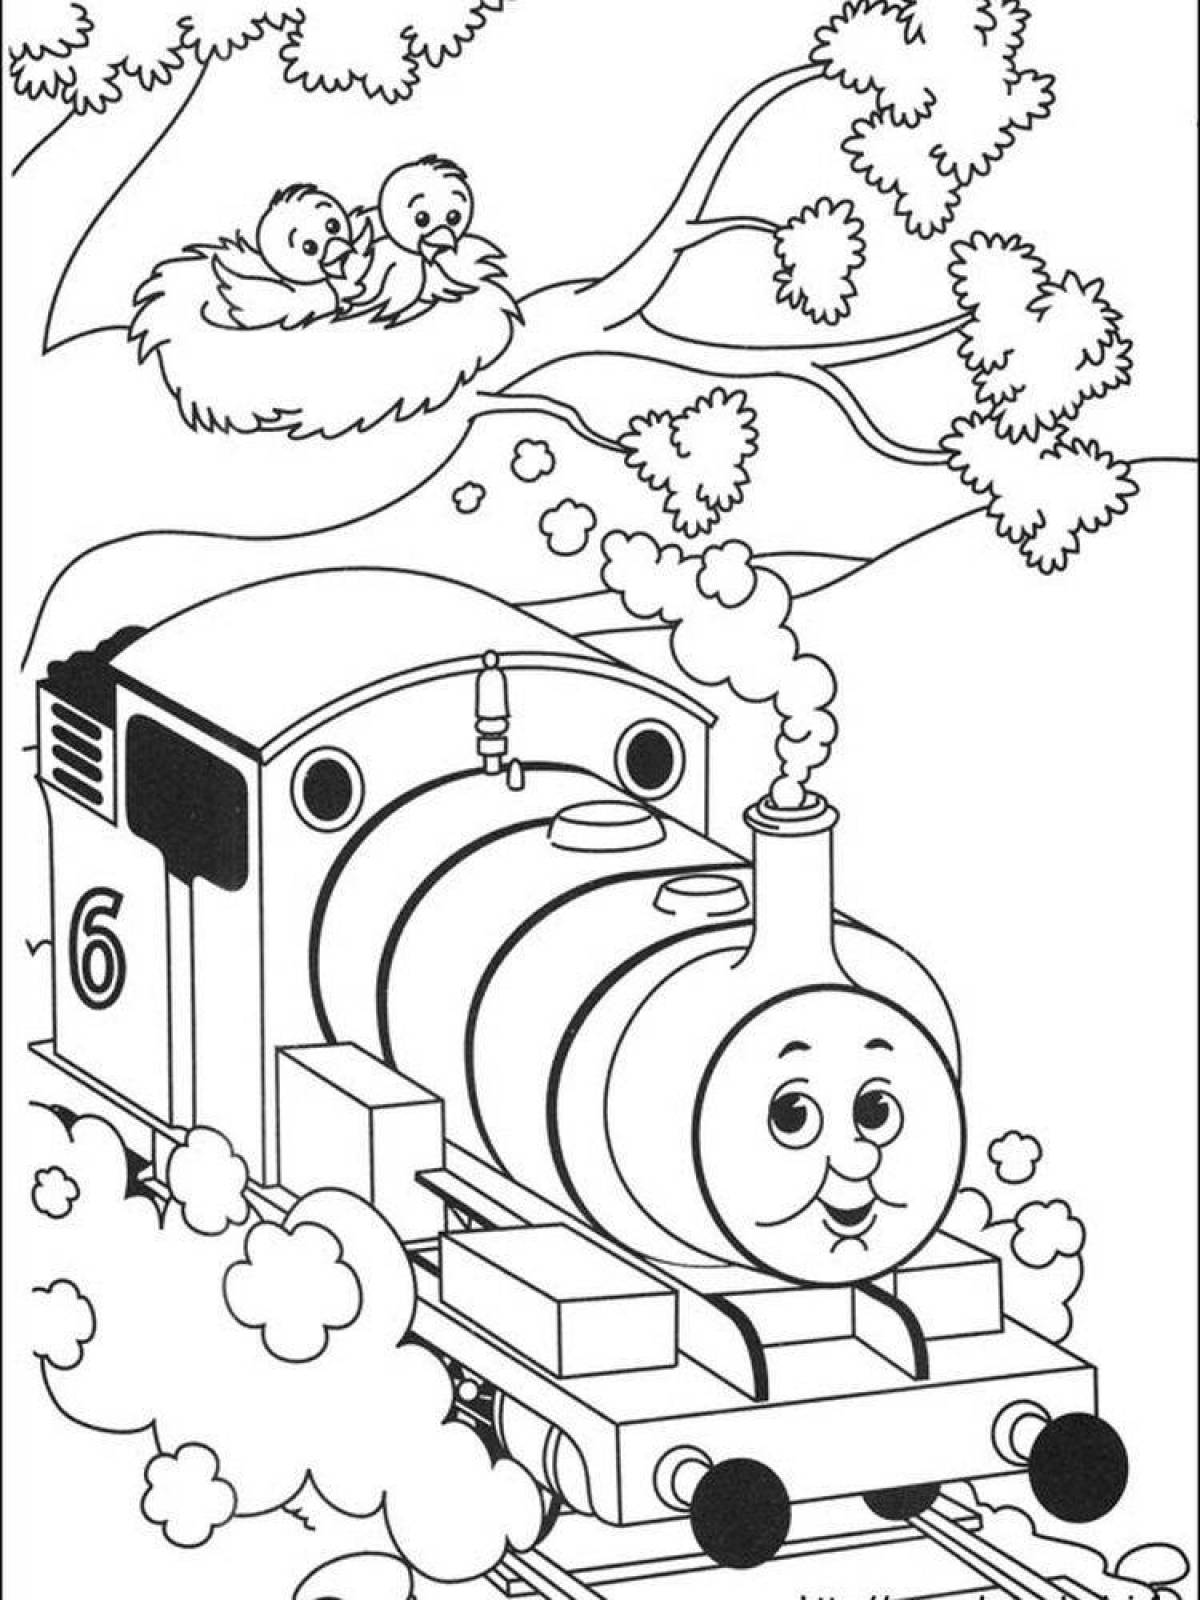 Colouring awesome thomas the tank engine